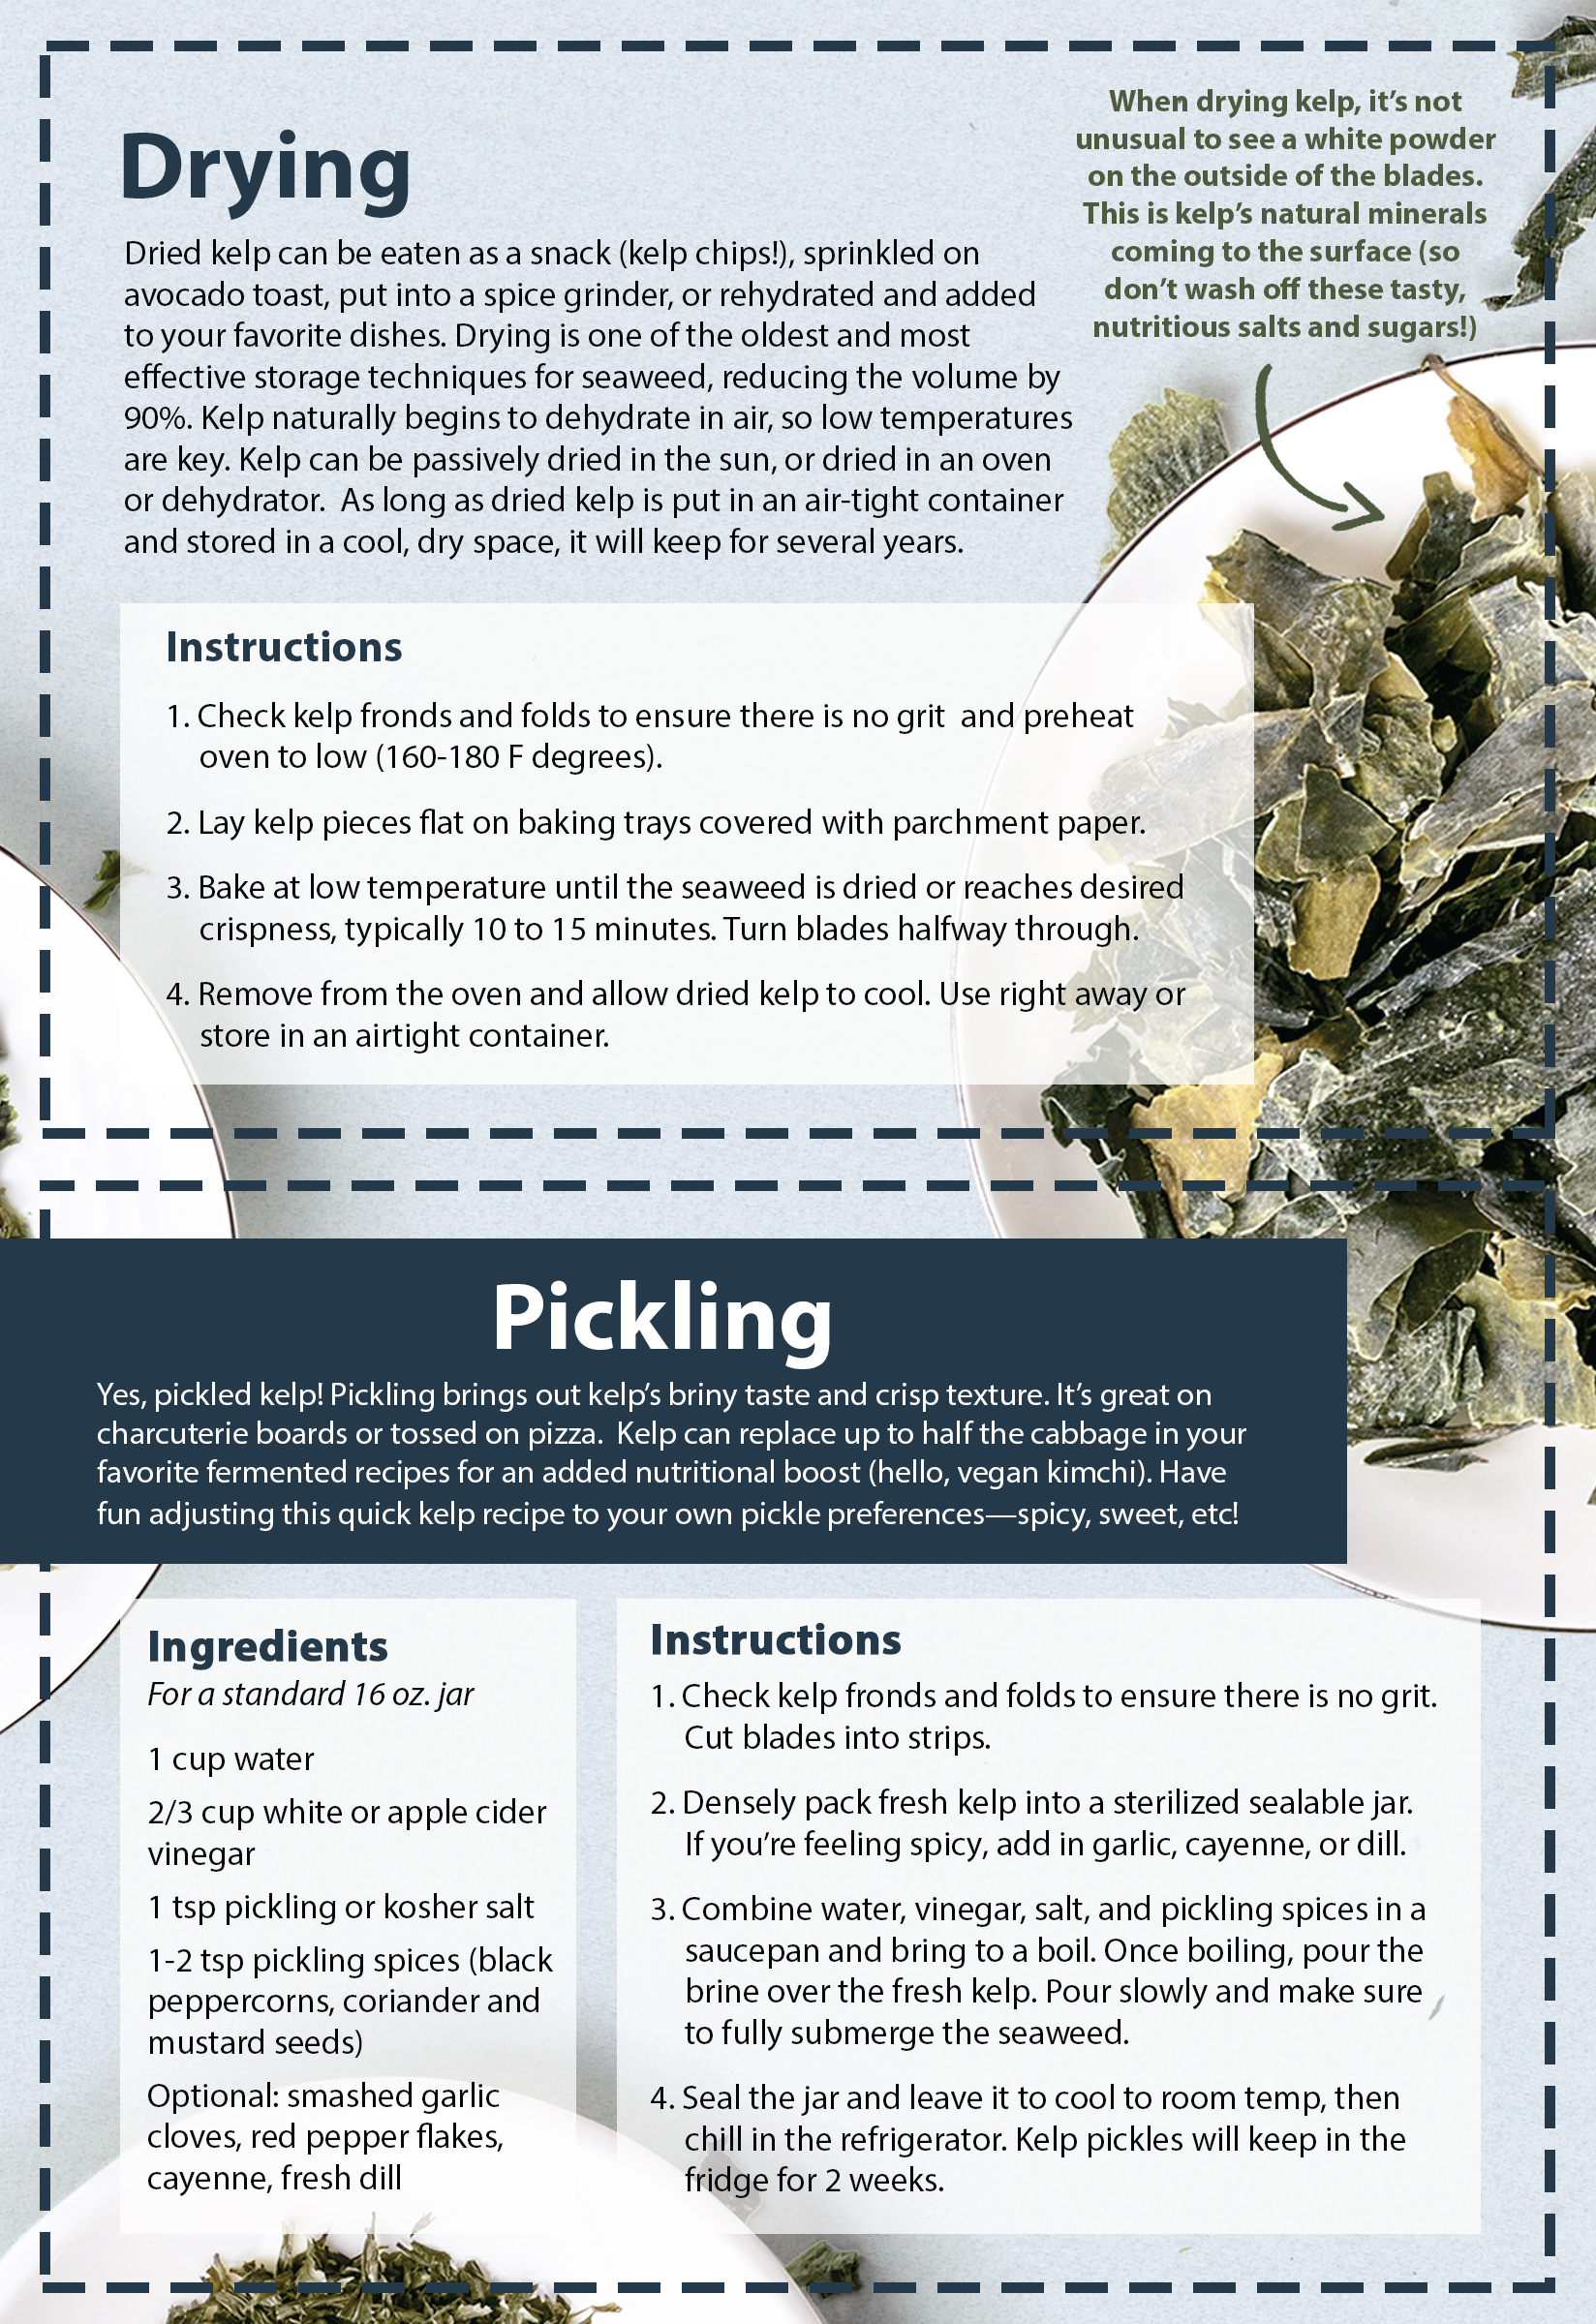 A kitchen recipe card with instructions on how to dry and pickle kelp, with a photo of dried kelp flakes in a dish in the background.